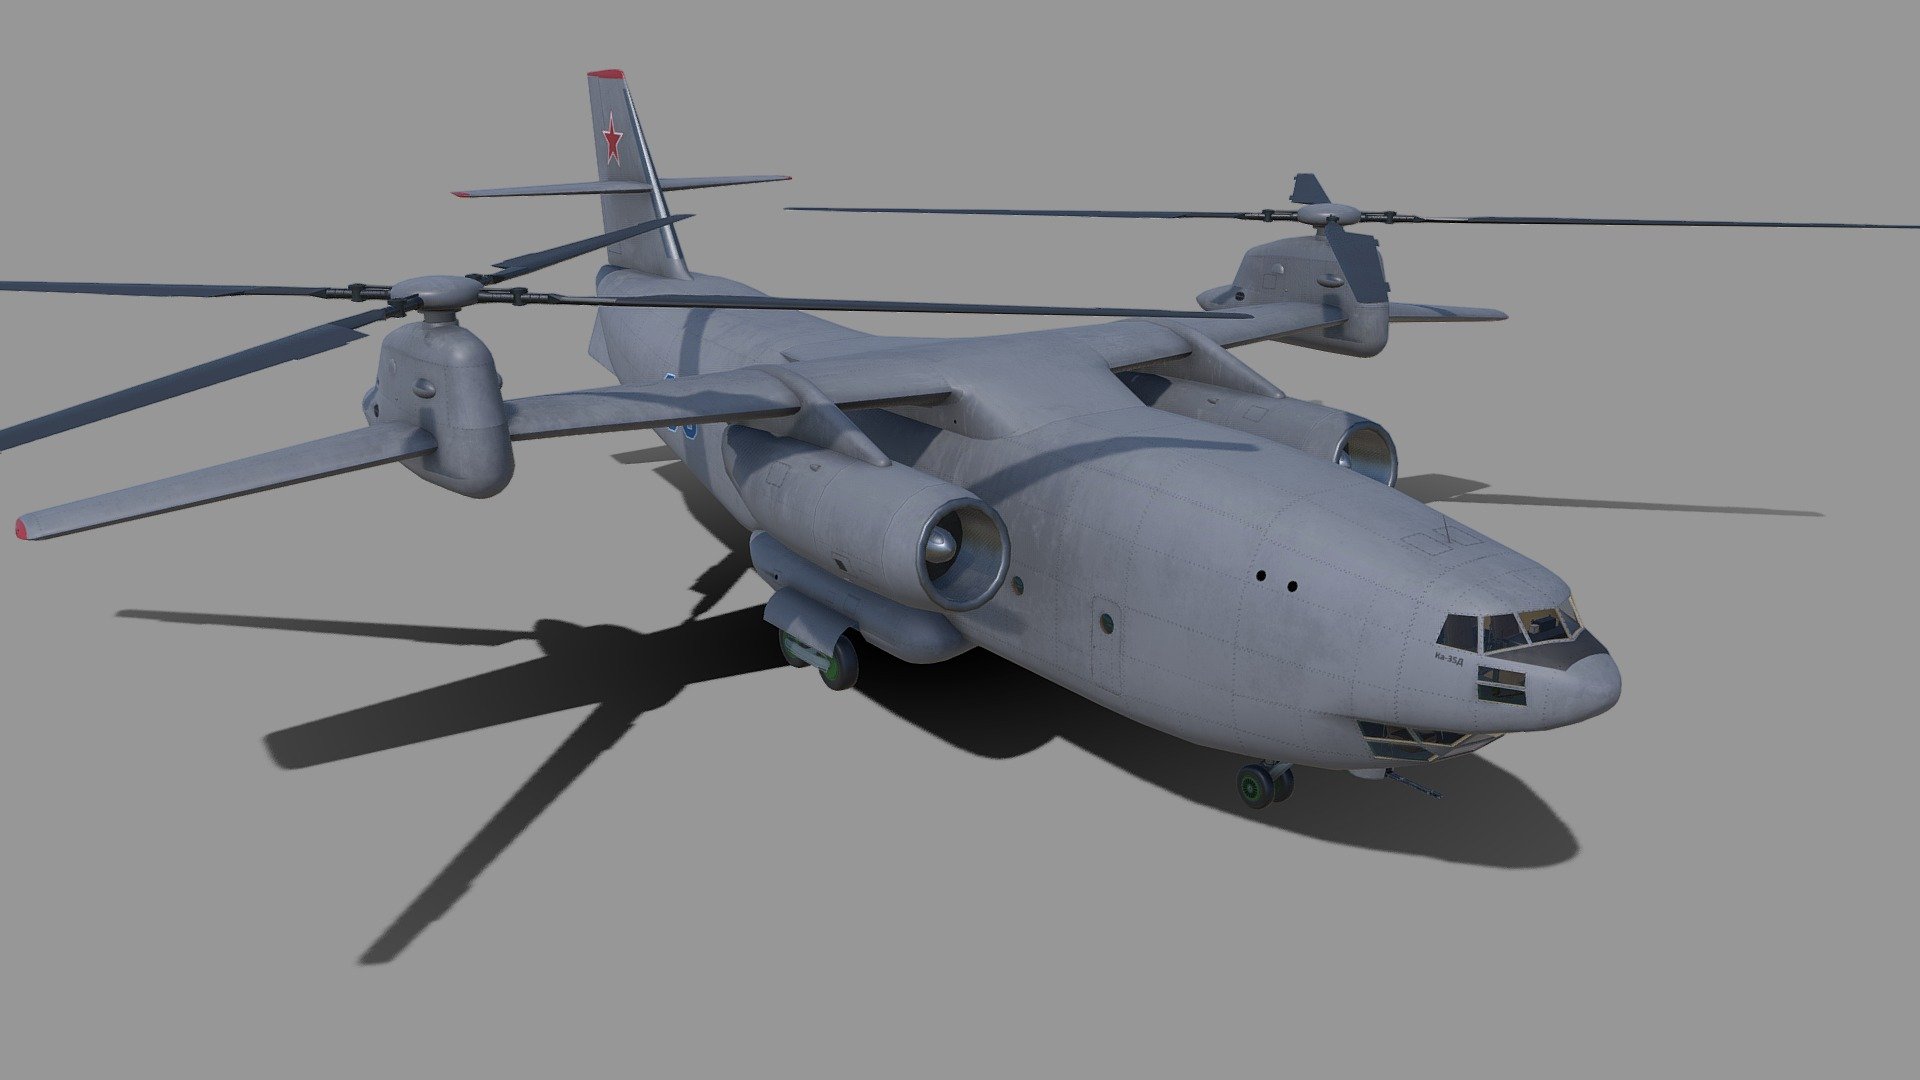 In 1967, the Kamov Design Bureau proposed a project for the Ka-35D transport rotorcraft,
intended to work in tandem with the An-12D aircraft. With a takeoff weight of 71.500 kg, it could carry
up to 11 tons of cargo for a distance of up to 700 km (maximum - 800 km) with a cruising speed of up to 500 km / h.
Its carrying capacity reached 20 tons, and the maximum design speed was 500-550 km / h.
On the Ka-35D, two turbojet engines were used with a rotor drive with overlapping disks of rotating blades.
The rear cargo hatch ramp was used for loading and unloading equipment.
In the nose of the mobile unit there was a remote-controlled cannon 3d model